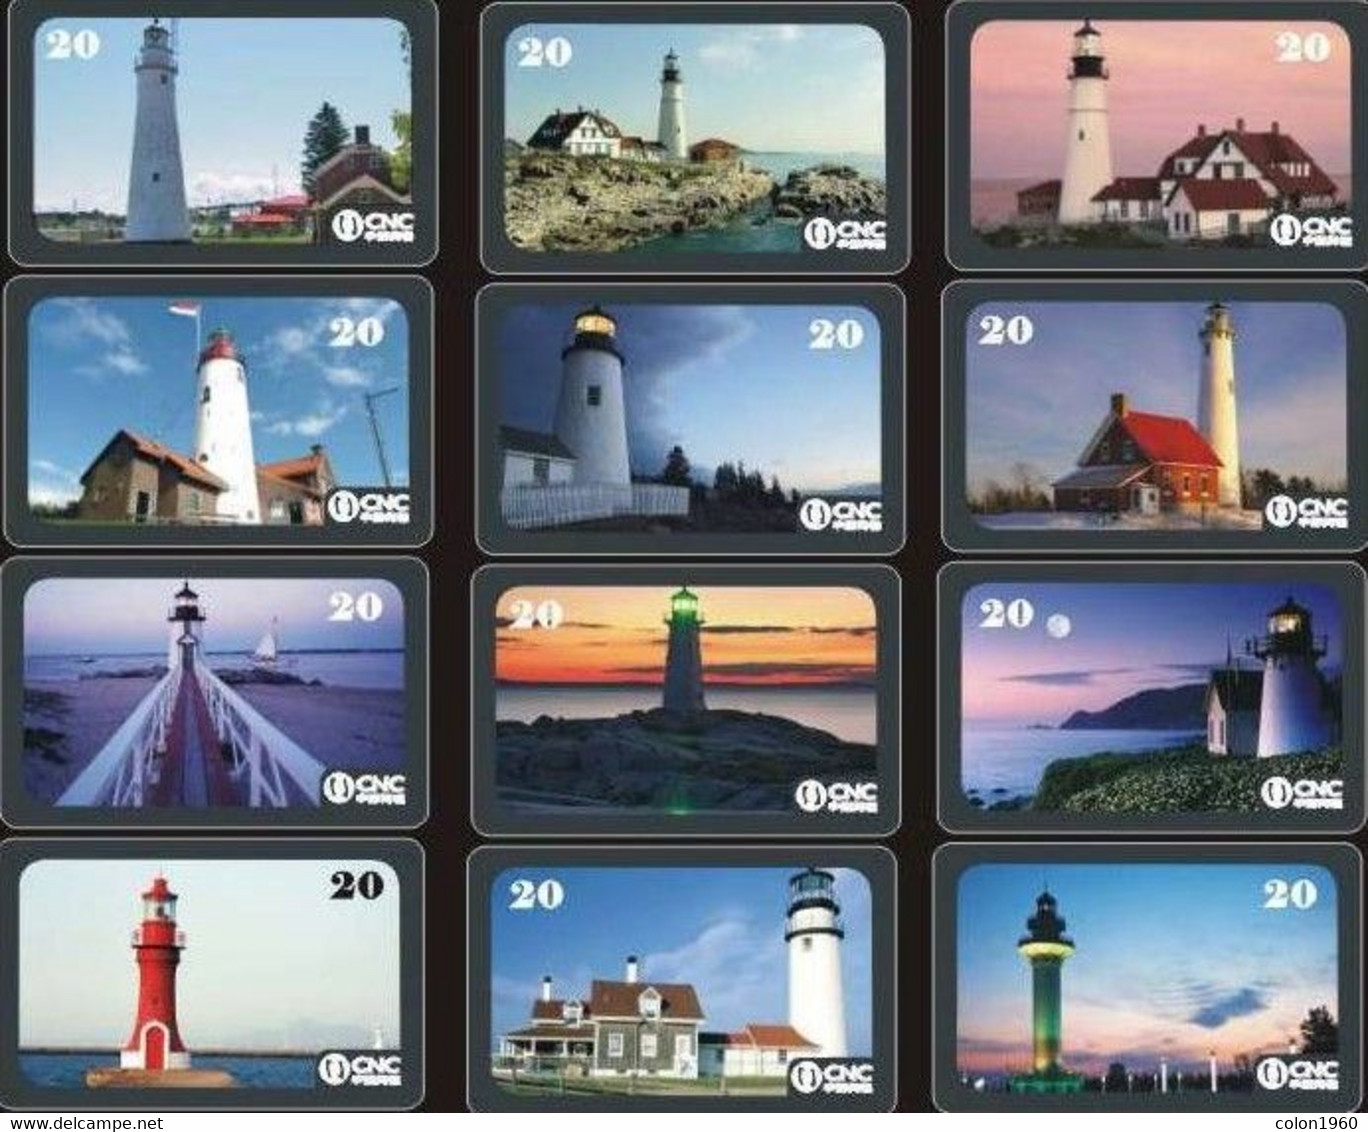 CHINA. FAROS - LIGHTHOUSES. SERIE OF 12 CARDS. CNC-NMG-07-13(1-12/12-12). (037) - Lighthouses